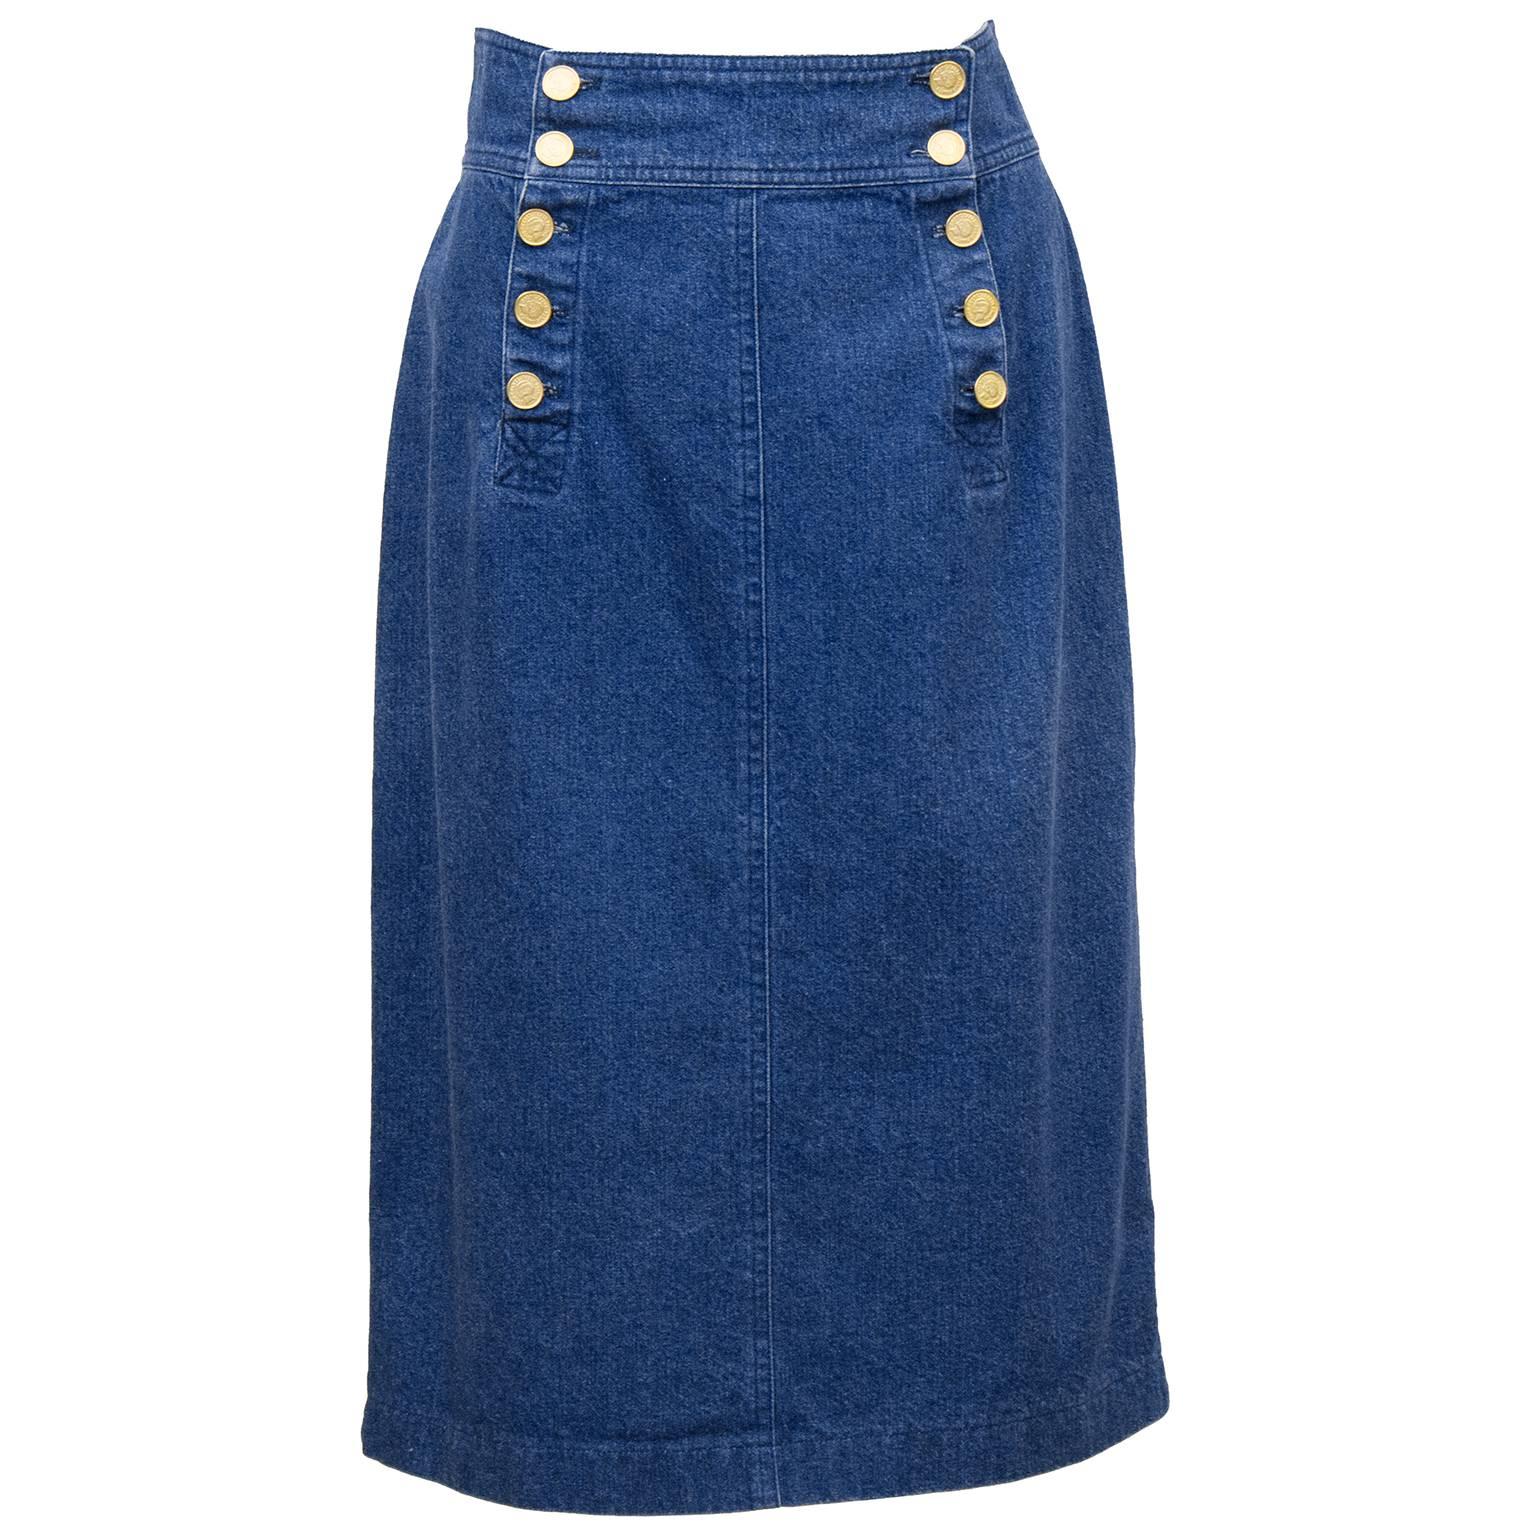 1990s Chanel Denim Skirt with Gold Buttons 